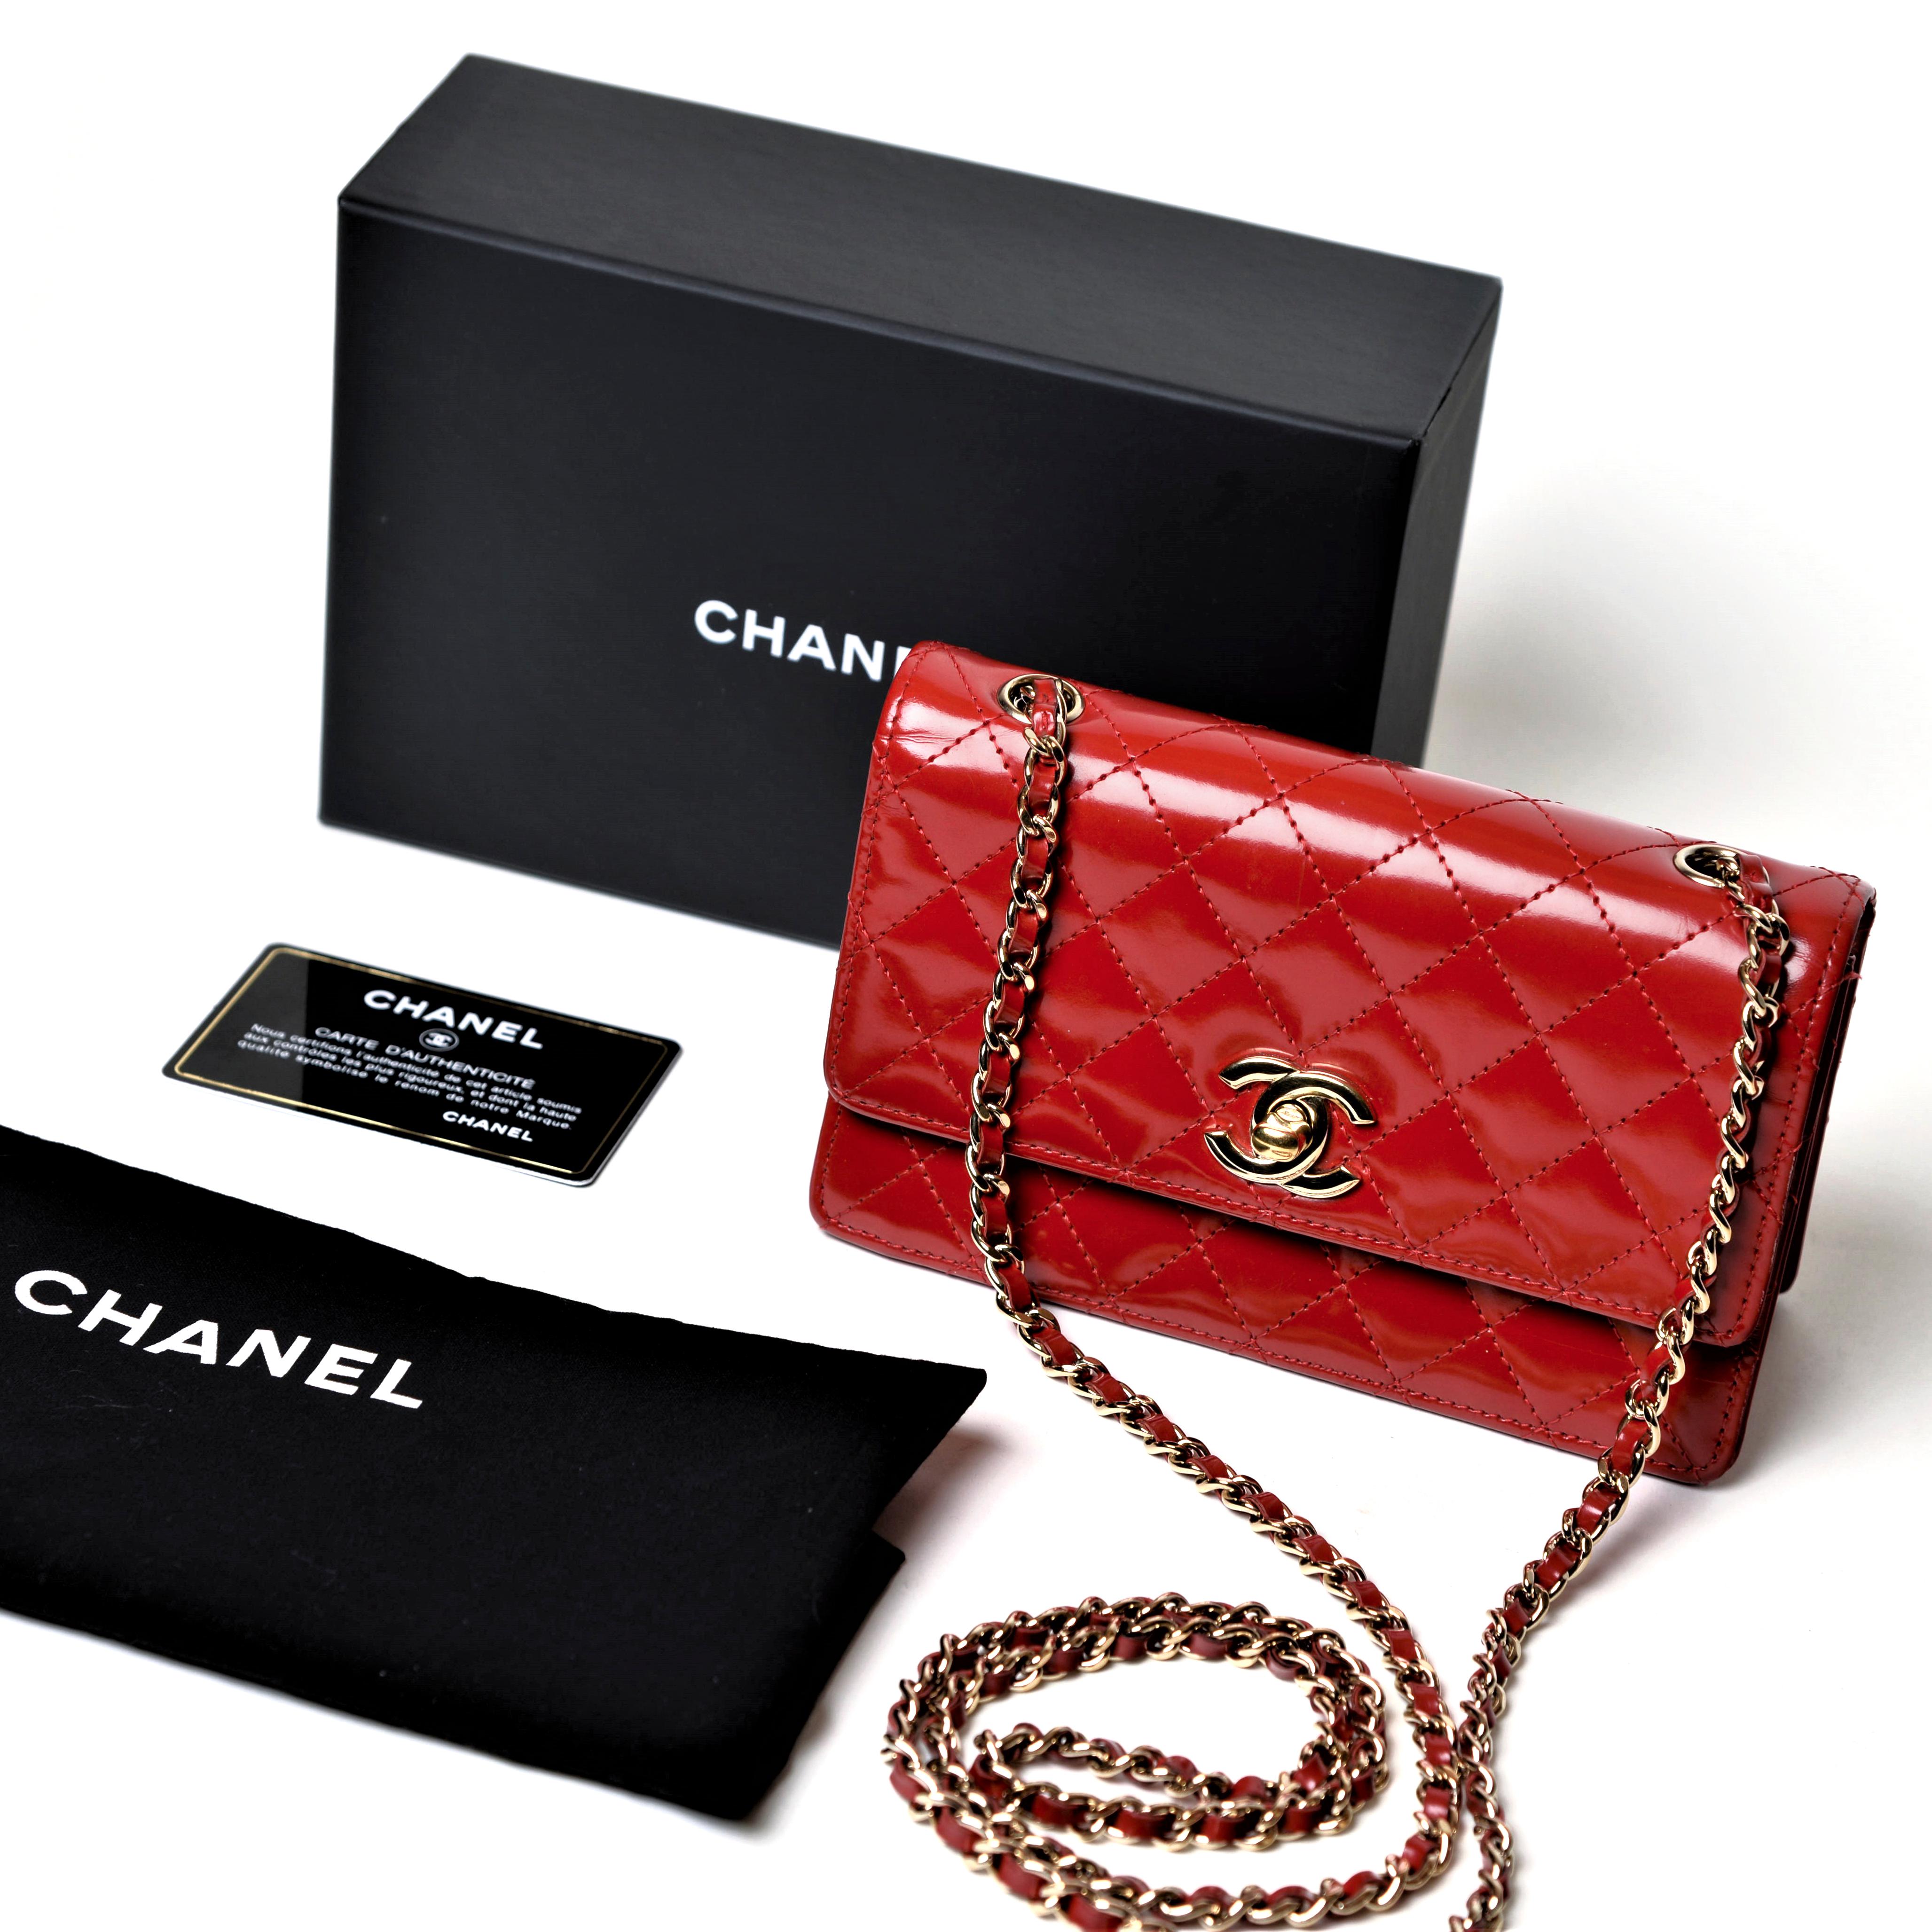 From the collection of SAVINETI we offer this Chanel Mini Flap Bag Red:
-	Brand: Chanel
-	Model: Mini Flap Bag
-	Year: 2011
-	Code: 15835542
-	Condition: Good
-	Materials: Patent Leather
-	Extras: Full-Set (Authenticity Card, Dustbag & Box)

We at